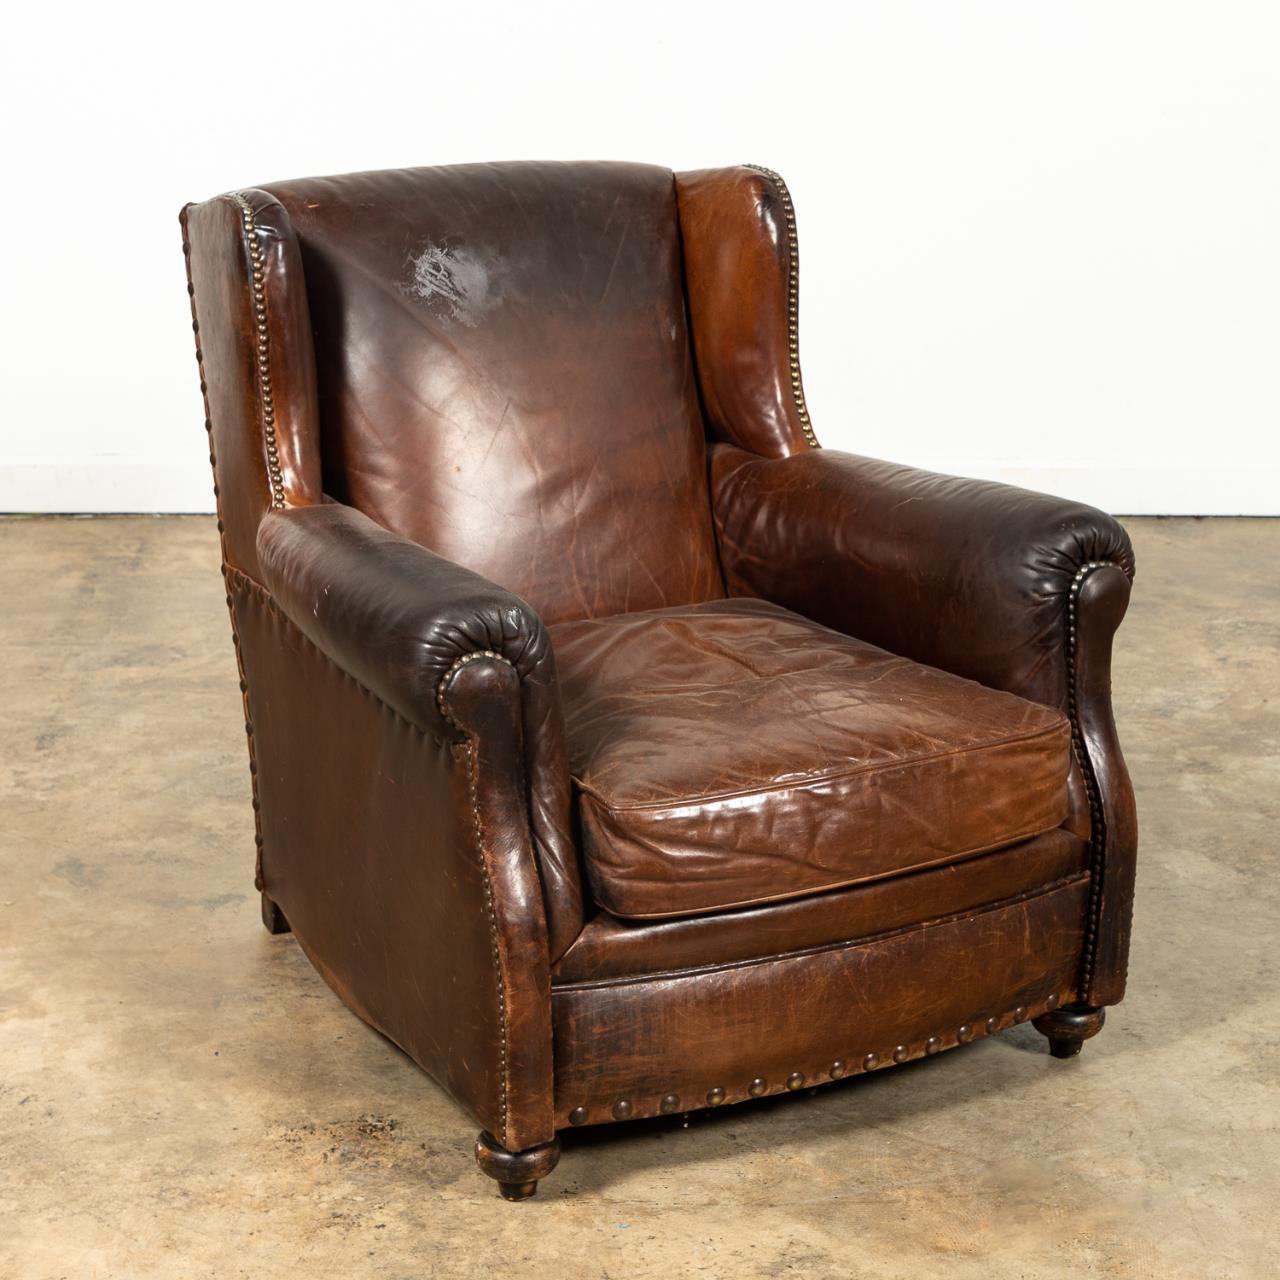 BROWN LEATHER UPHOLSTERED LOUNGE